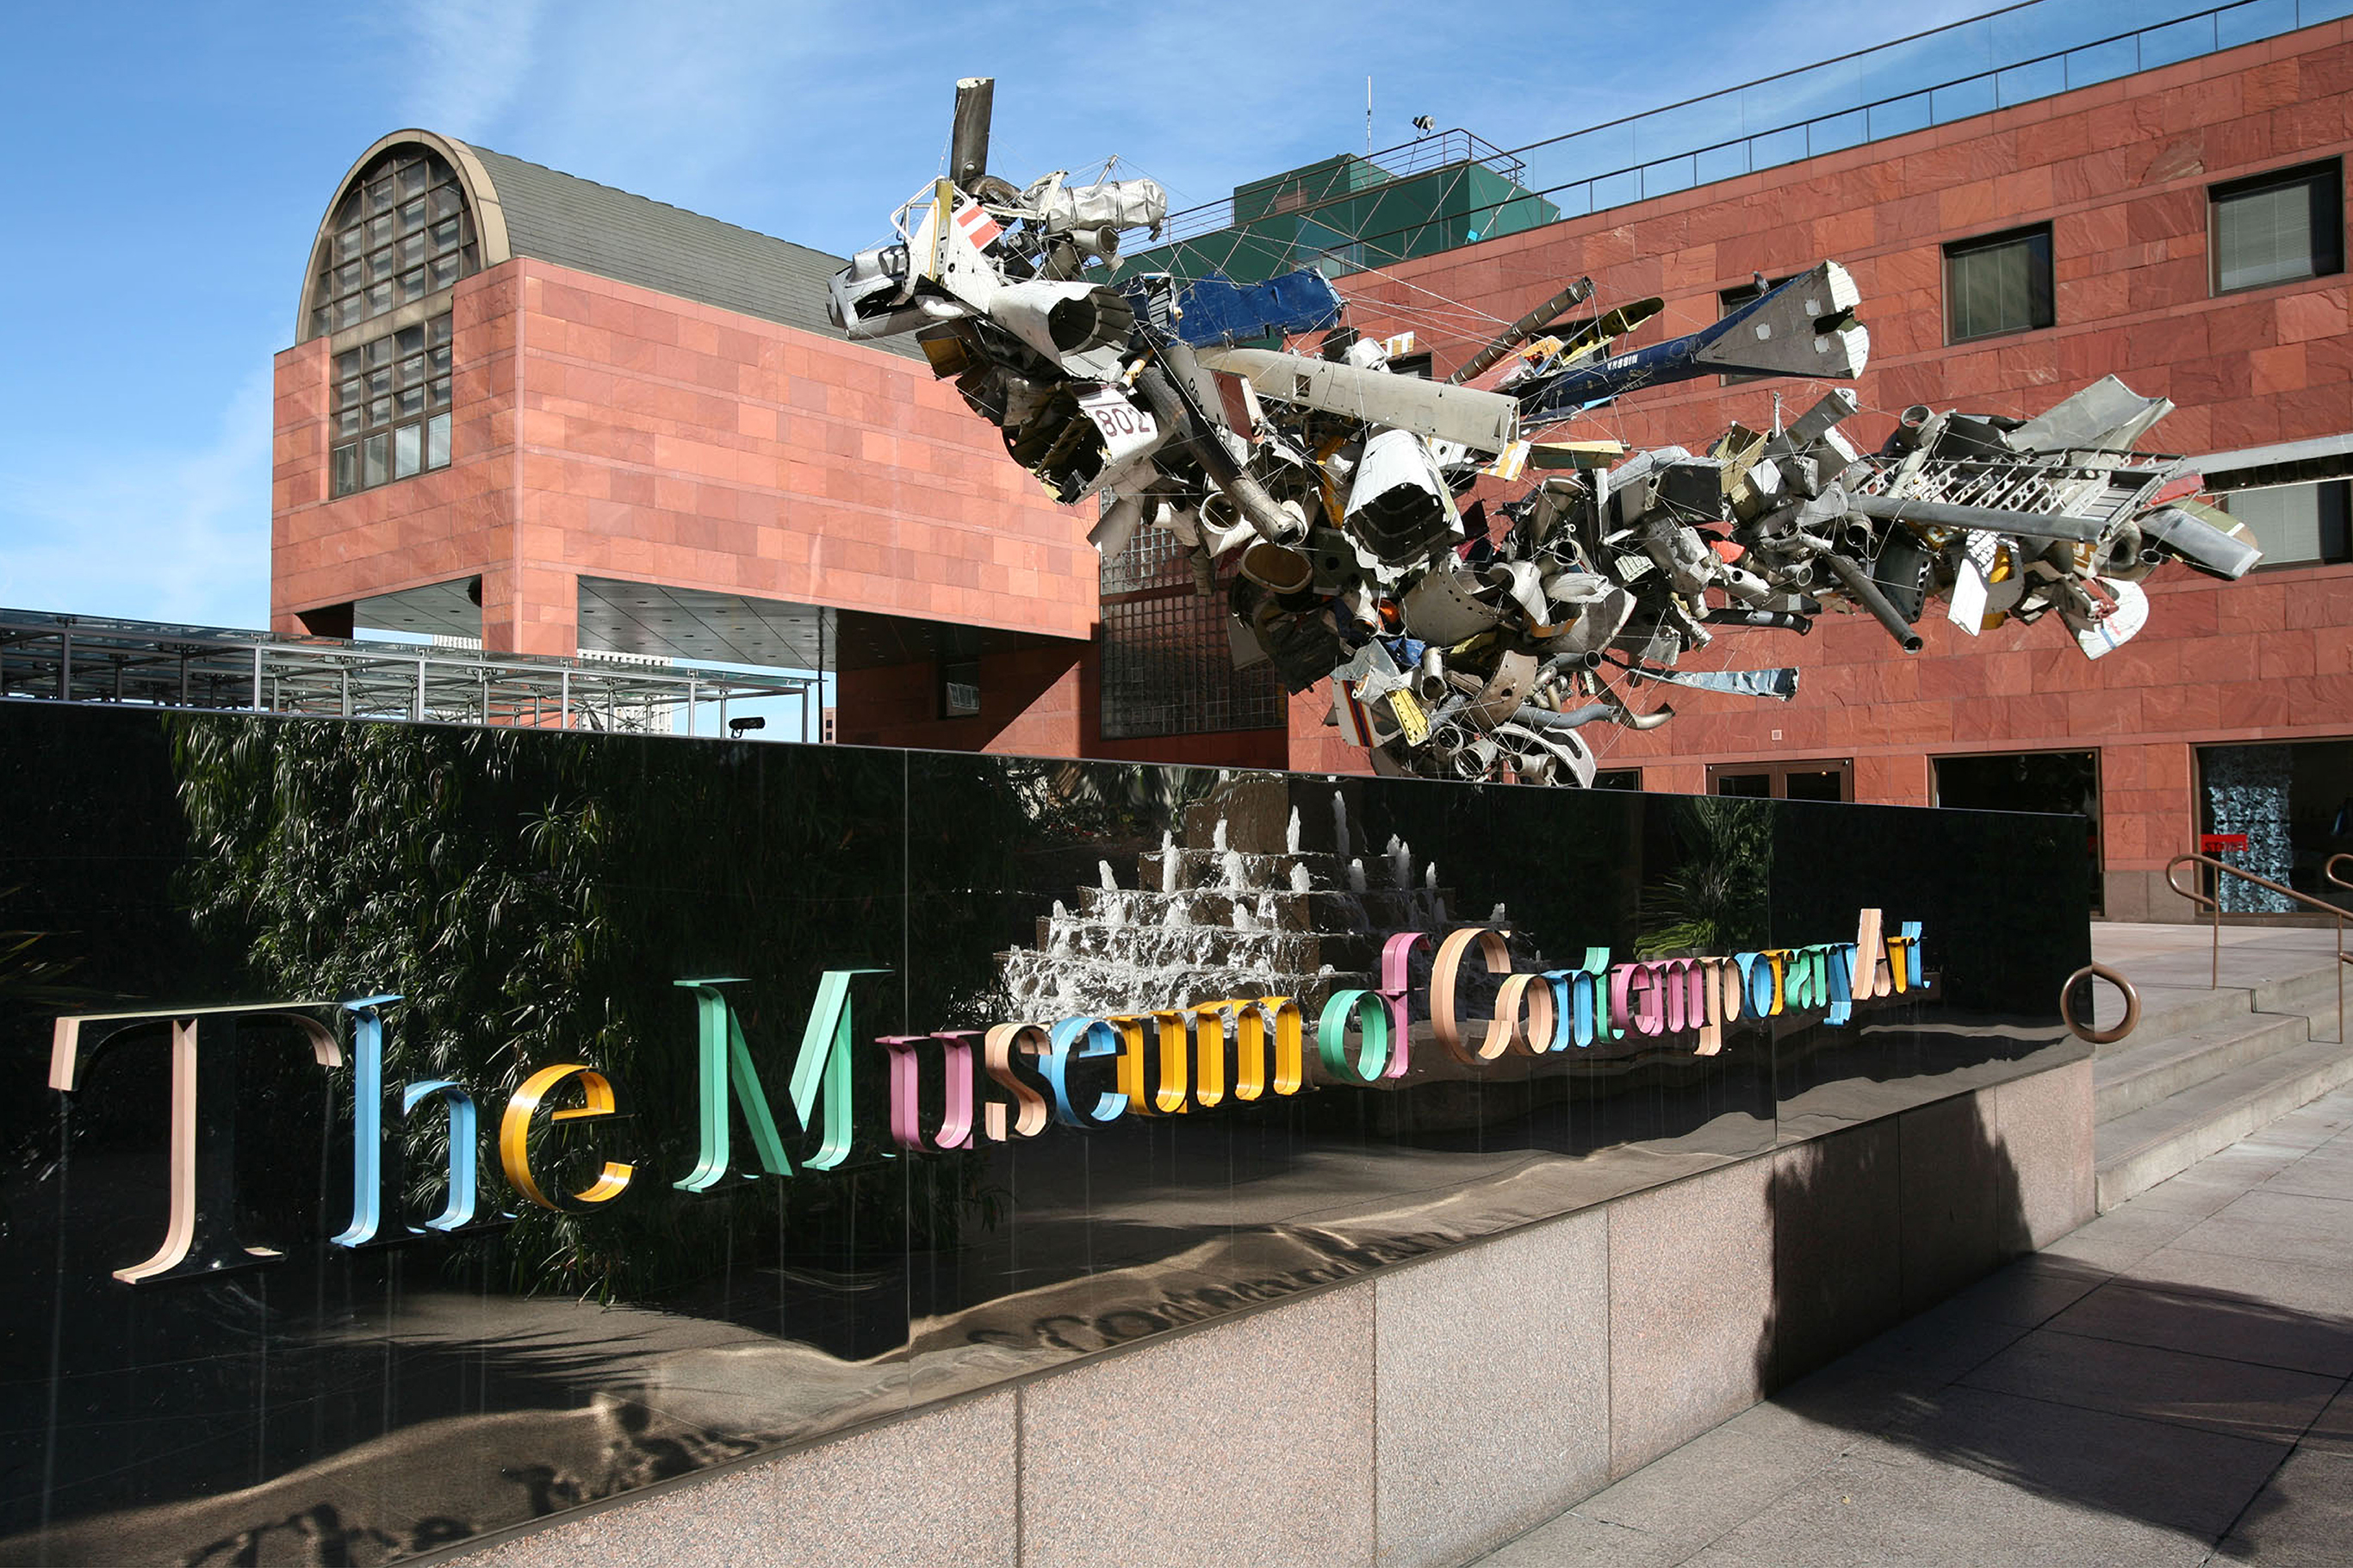 The Museum of Contemporary Art sign.